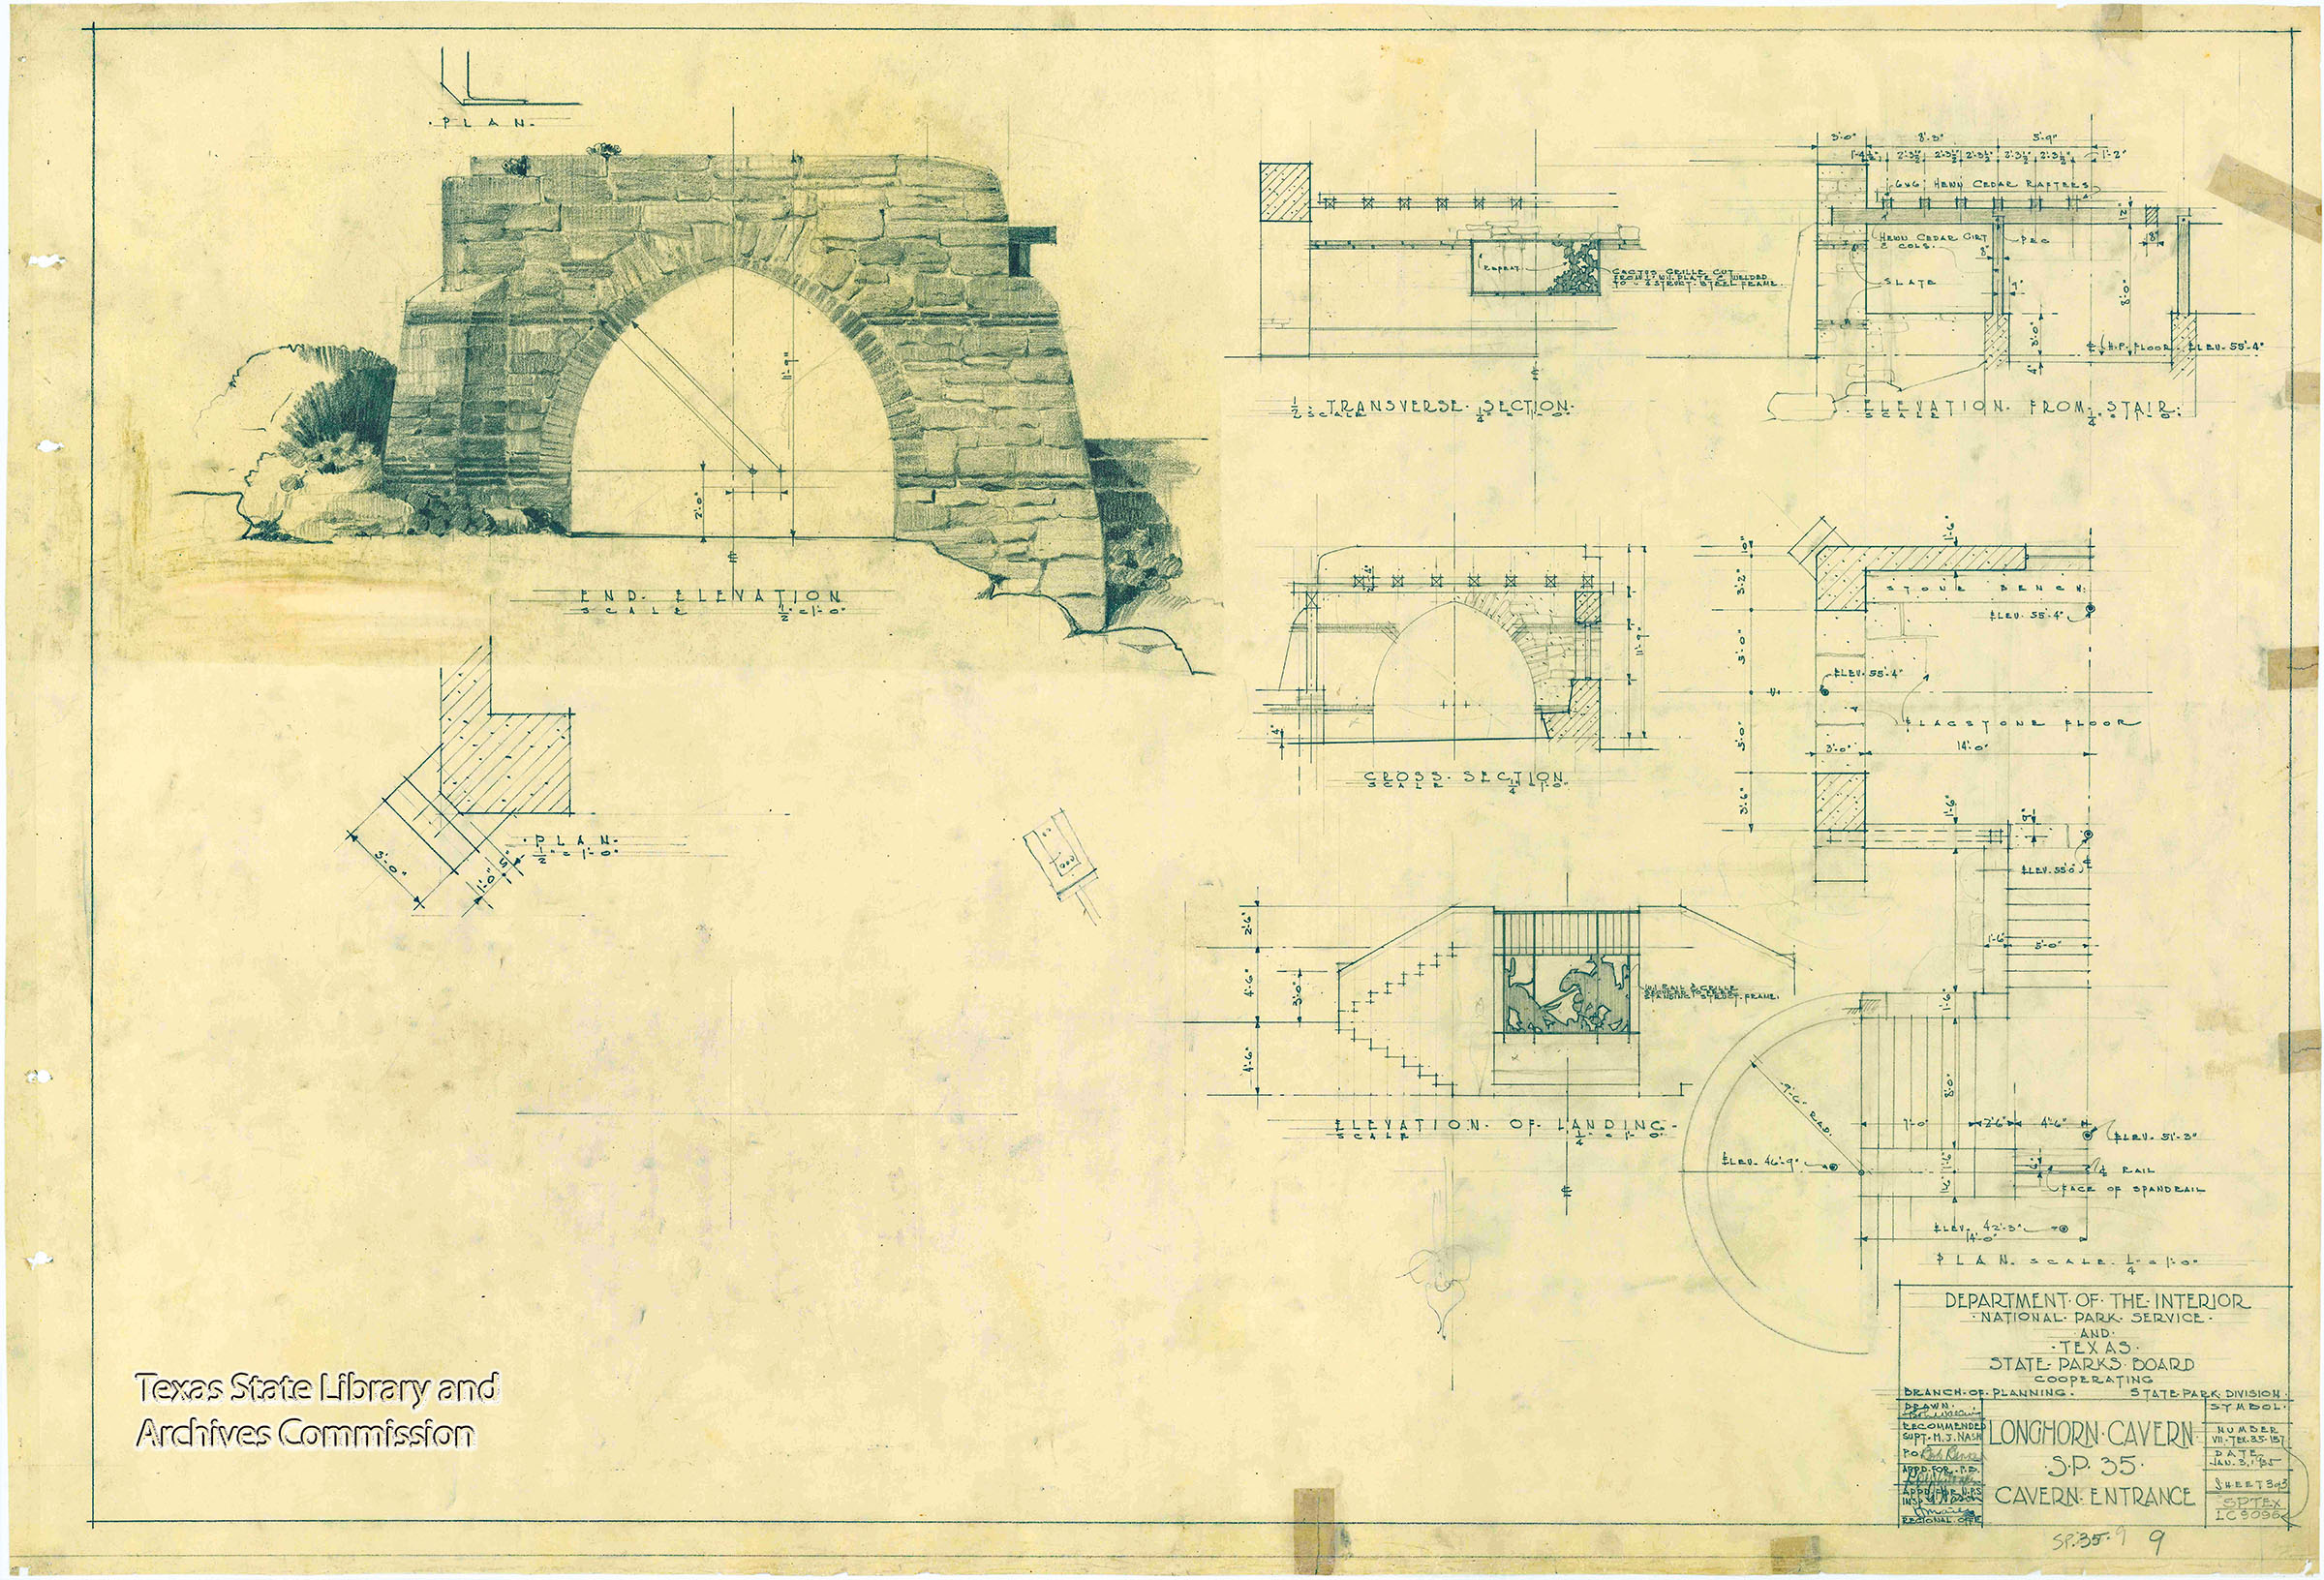 A blueprint showing a brick arch and portions of the cavern system